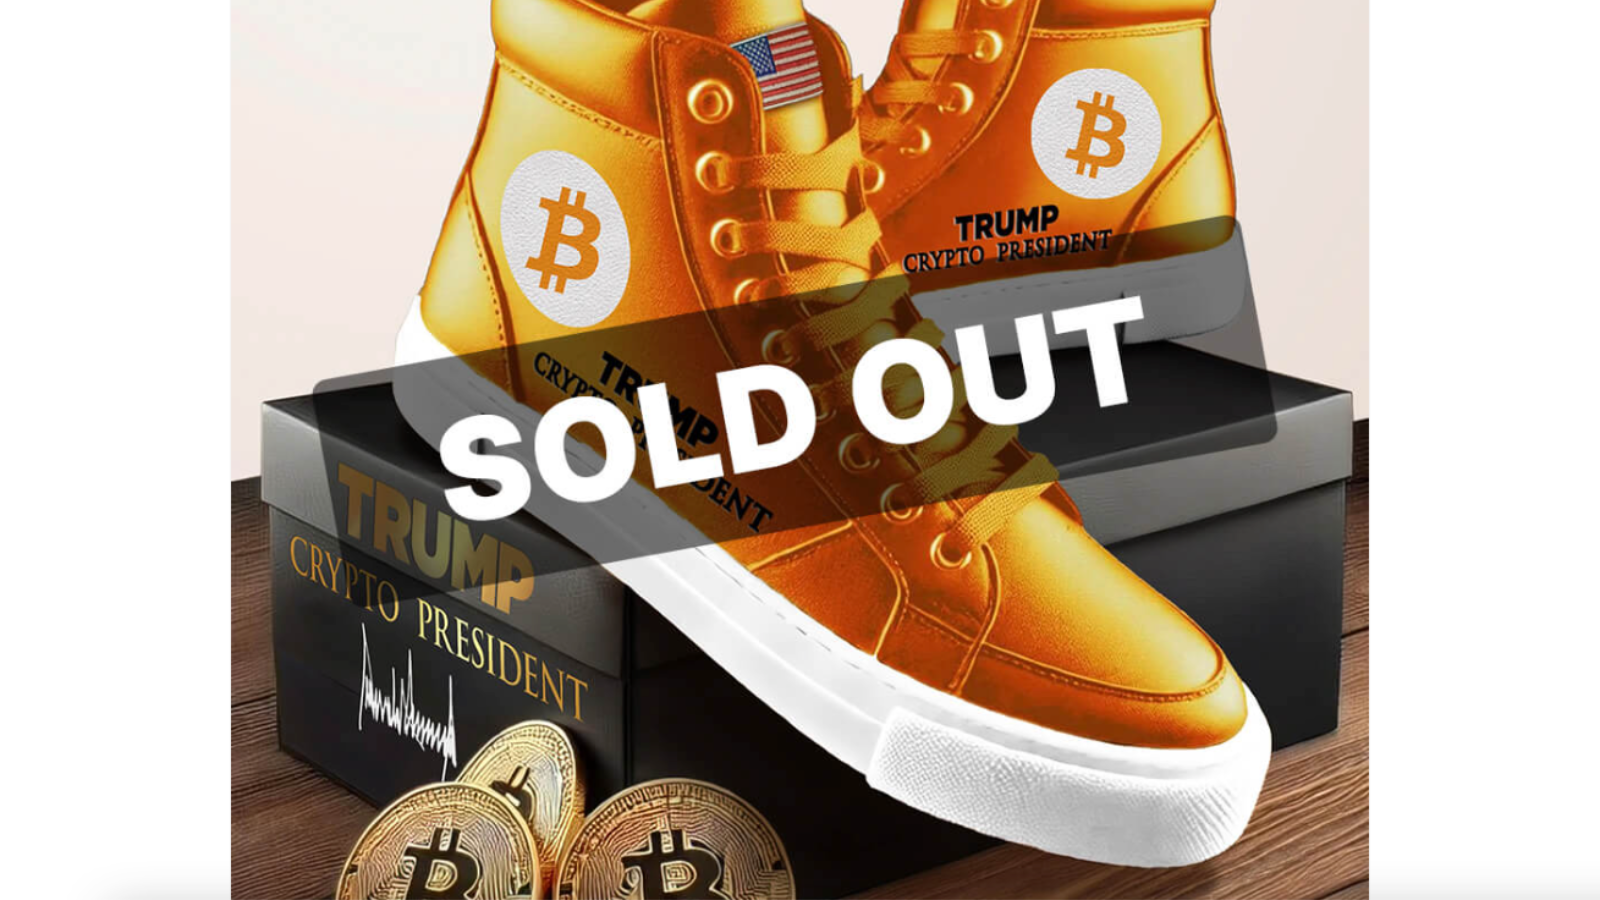 Trump Bitcoin Sneakers Sell Out, Already on EBay for $2,500